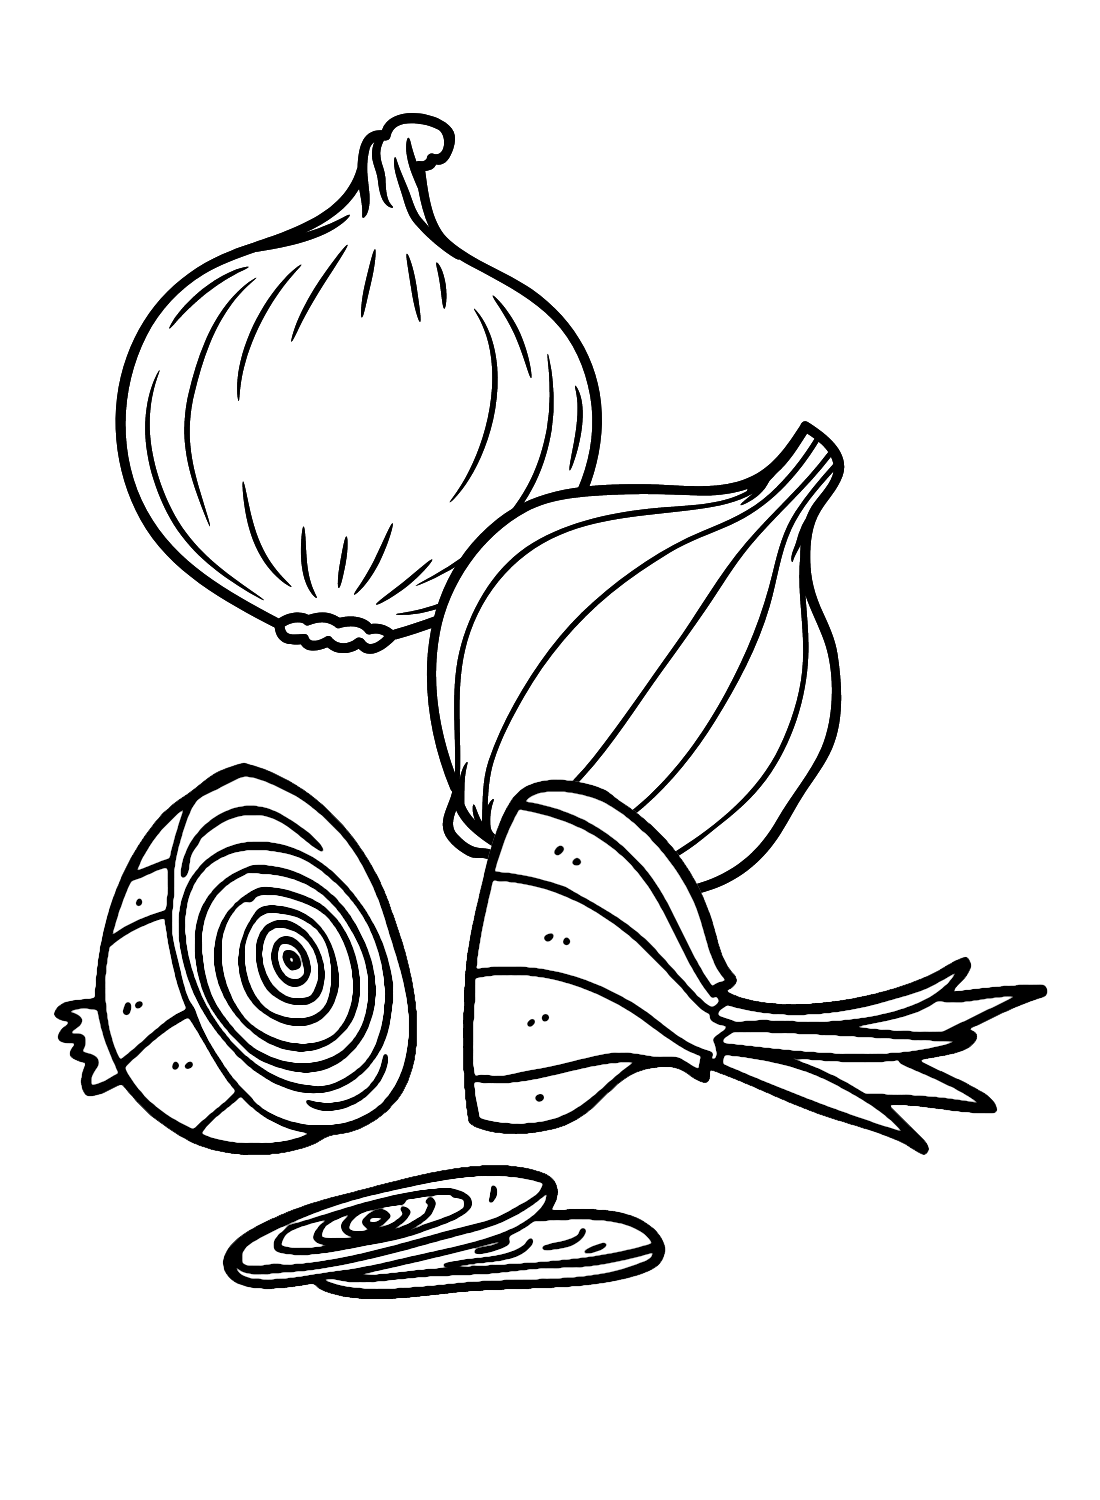 Onion coloring pages printable for free download